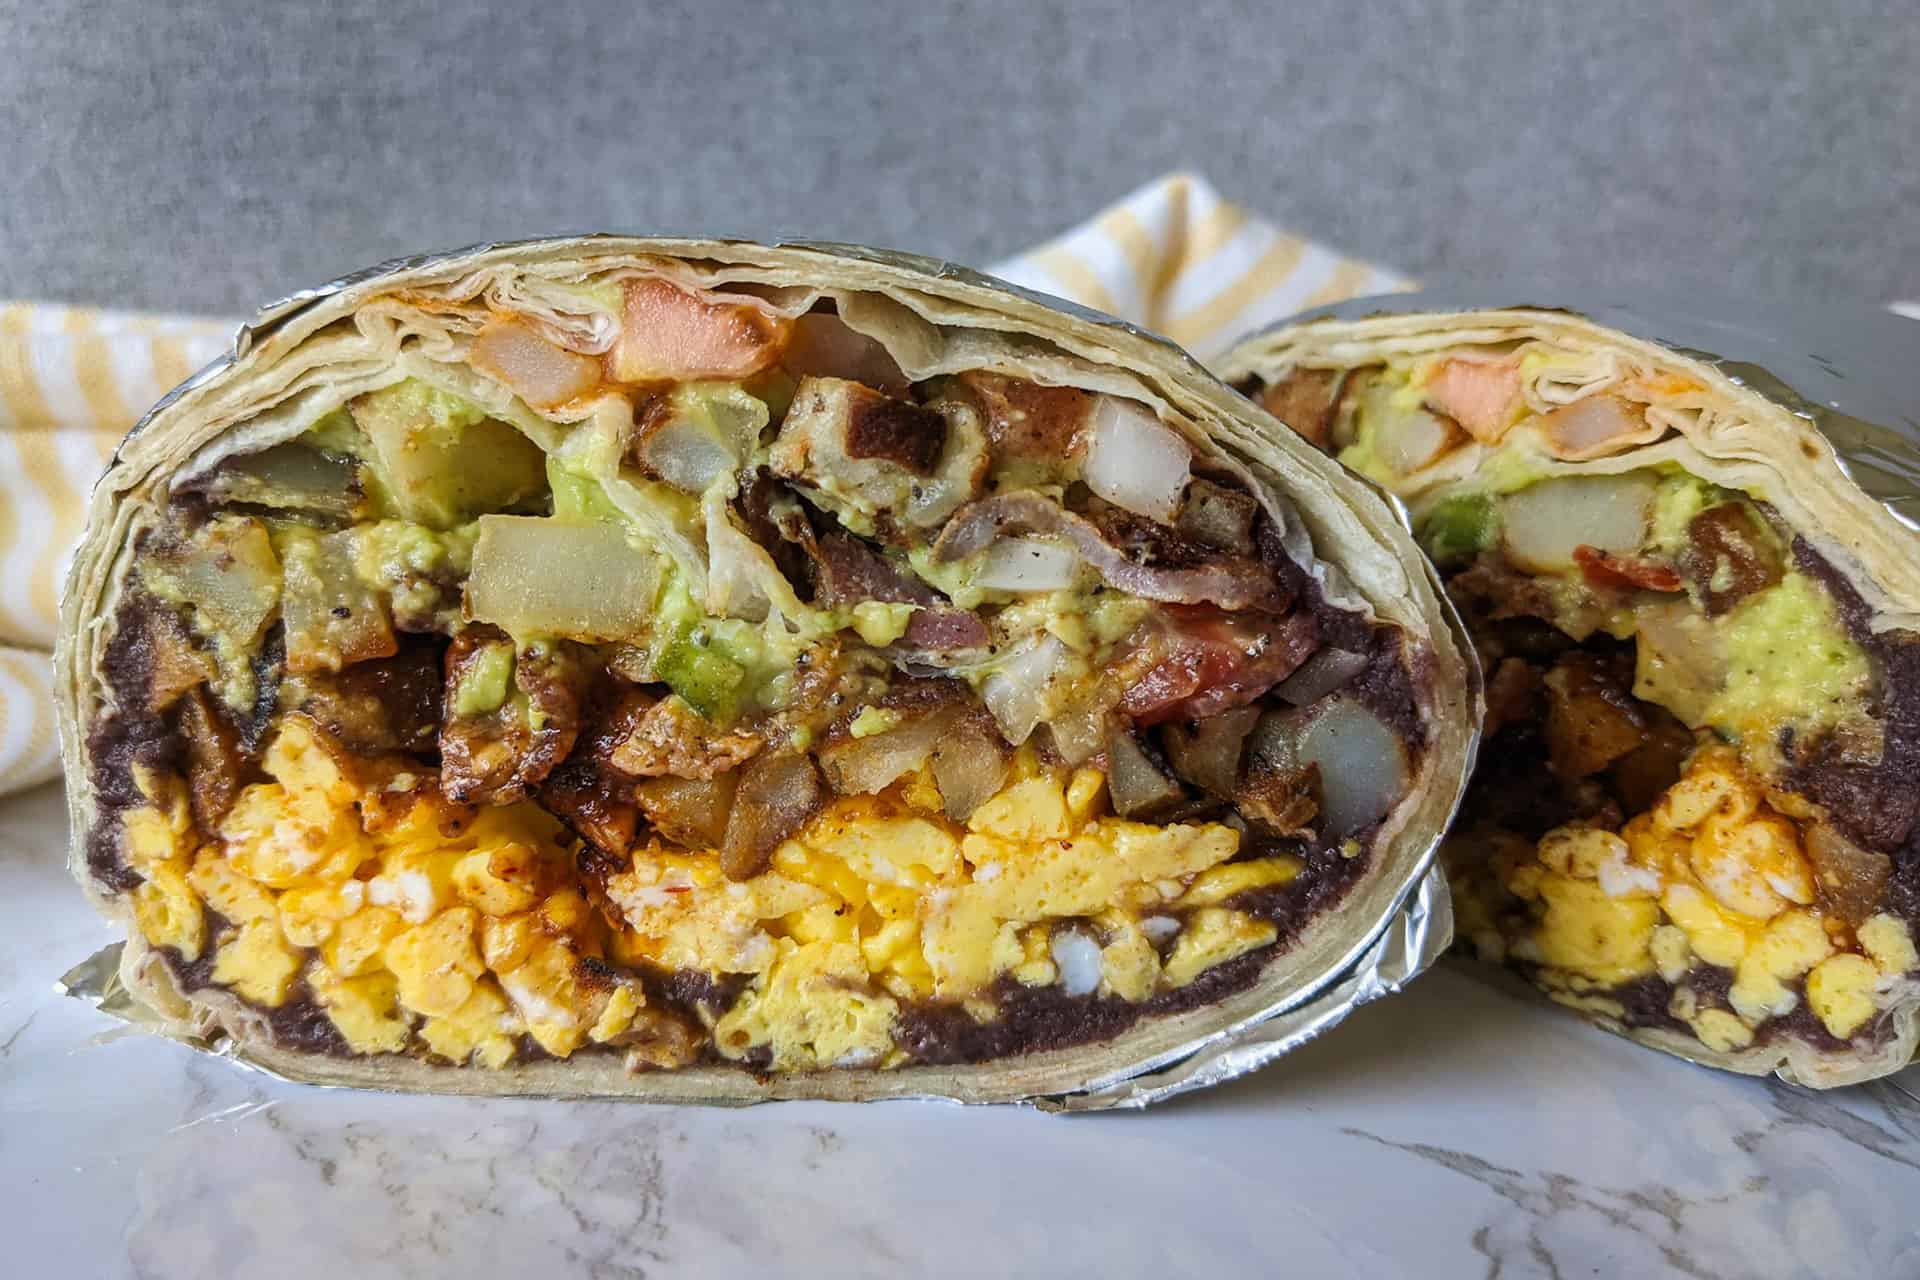 A giant breakfast burrito with eggs, beans, and cheese